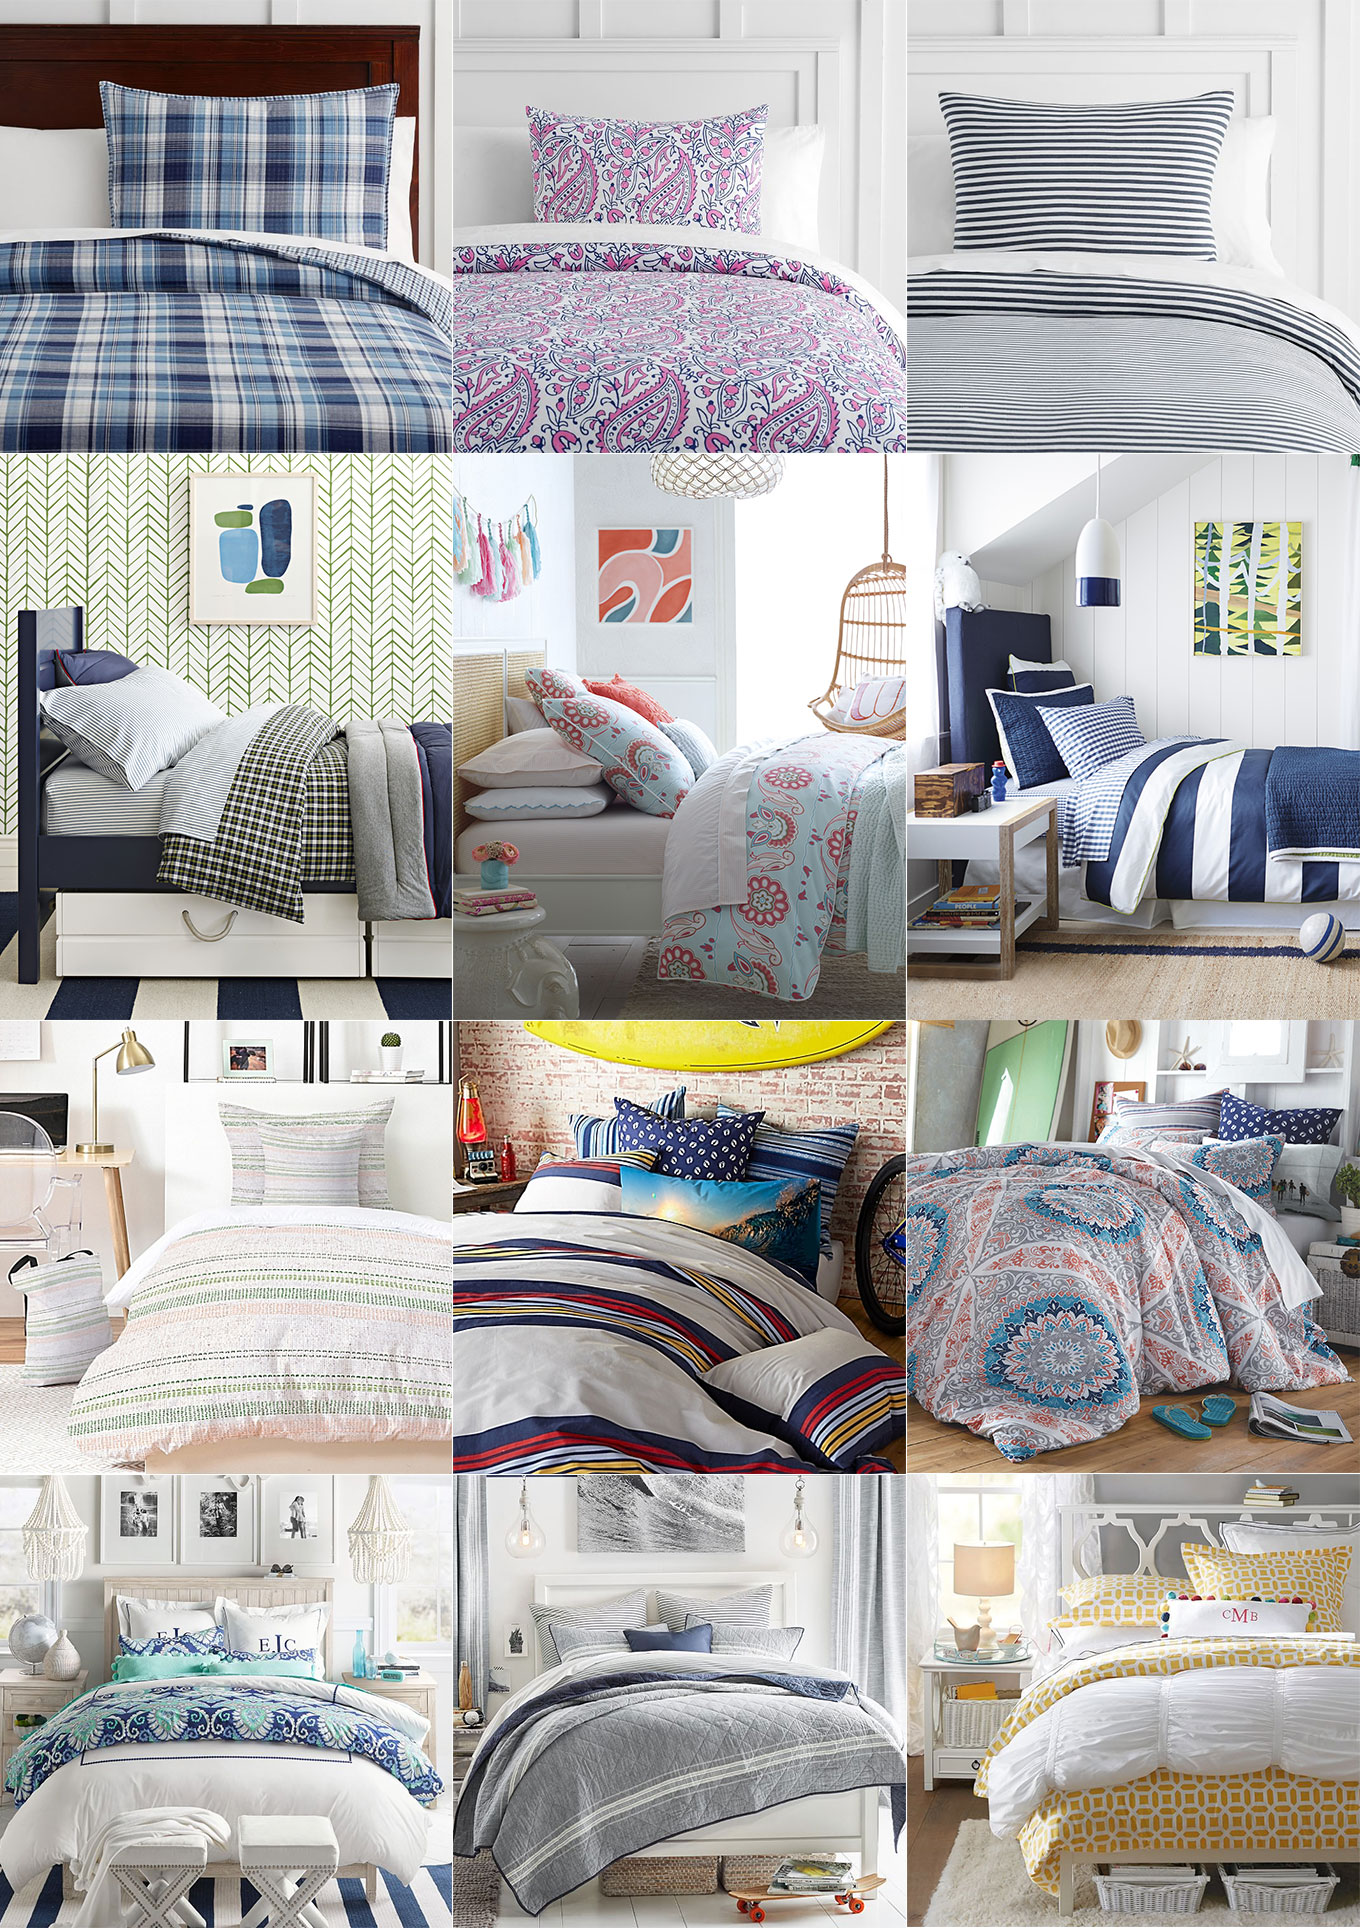 Ridgely Brode is looking for bedding for her sons for their dorm life and finds a options for both girls and boys on her blog, Ridgely's Radar.